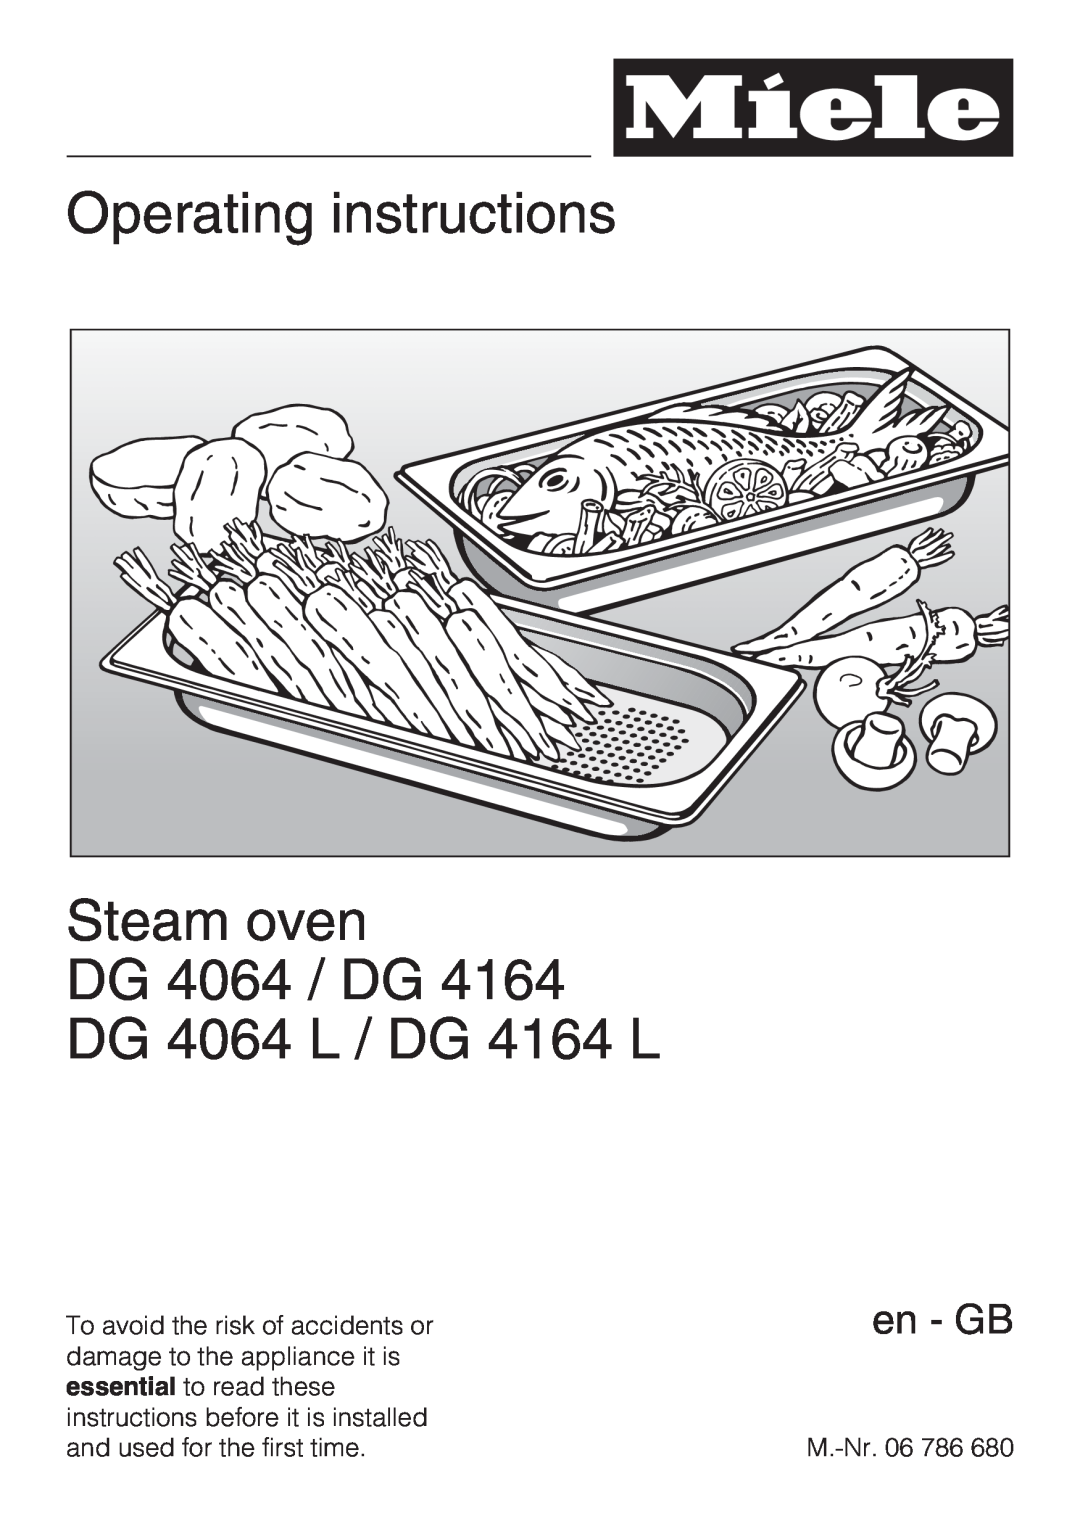 Miele manual Operating instructions Steam oven DG DG 4064 L 